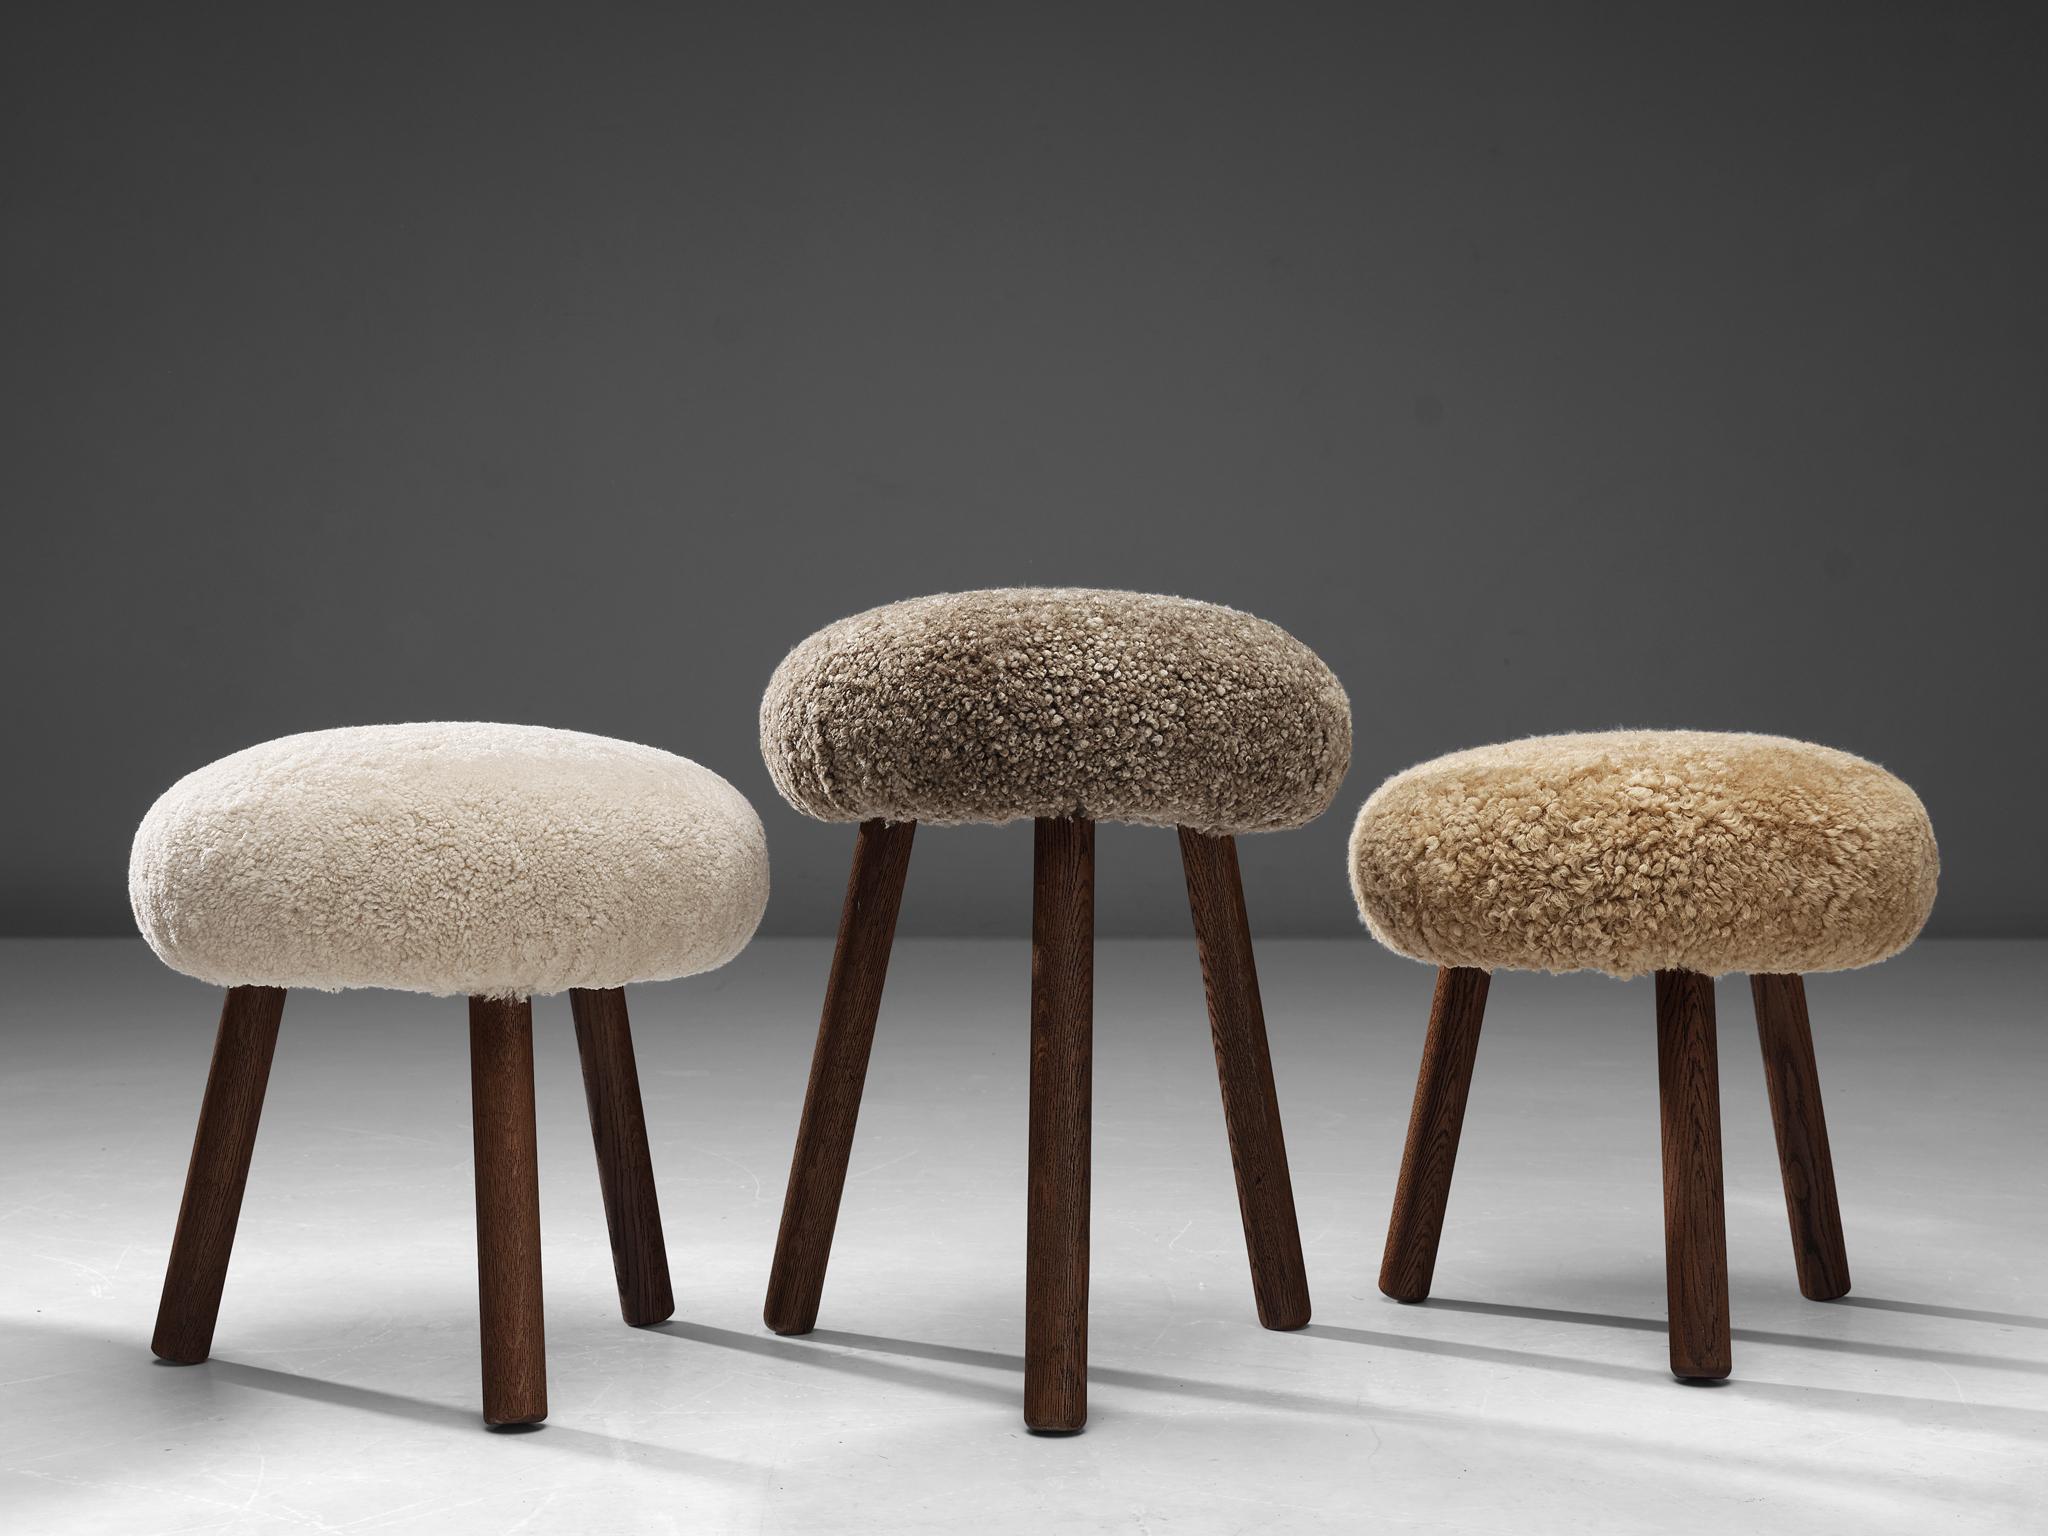 Tripod stools or side tables, solid oak, fabric, Switzerland, 1960s-1970s.

Beautiful crafted oak stools originating from the exhibition centre in St. Gallen, Switzerland. The seats are reupholstered in a soft shearling fabric that ranges in colour